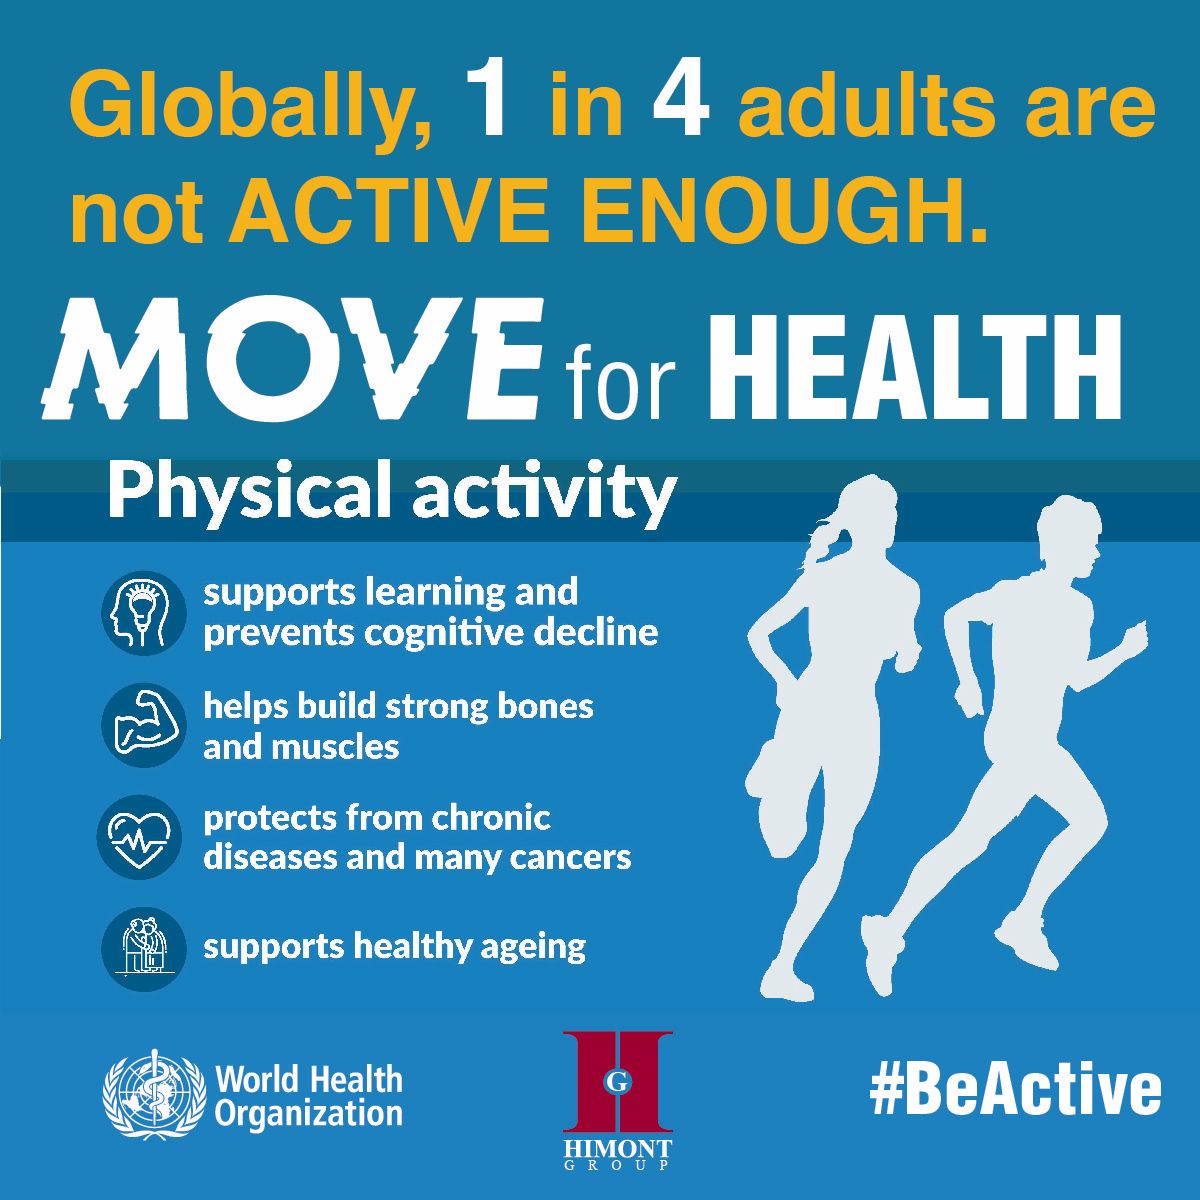 🌍 Today, we celebrate Global Move for Health Day! 🌍

Let's use this day to inspire each other to make movement a daily habit. Small steps can lead to big changes! 💪

#MoveForHealth #GlobalMoveForHealthDay 🚶‍♀️🧘‍♂️💃